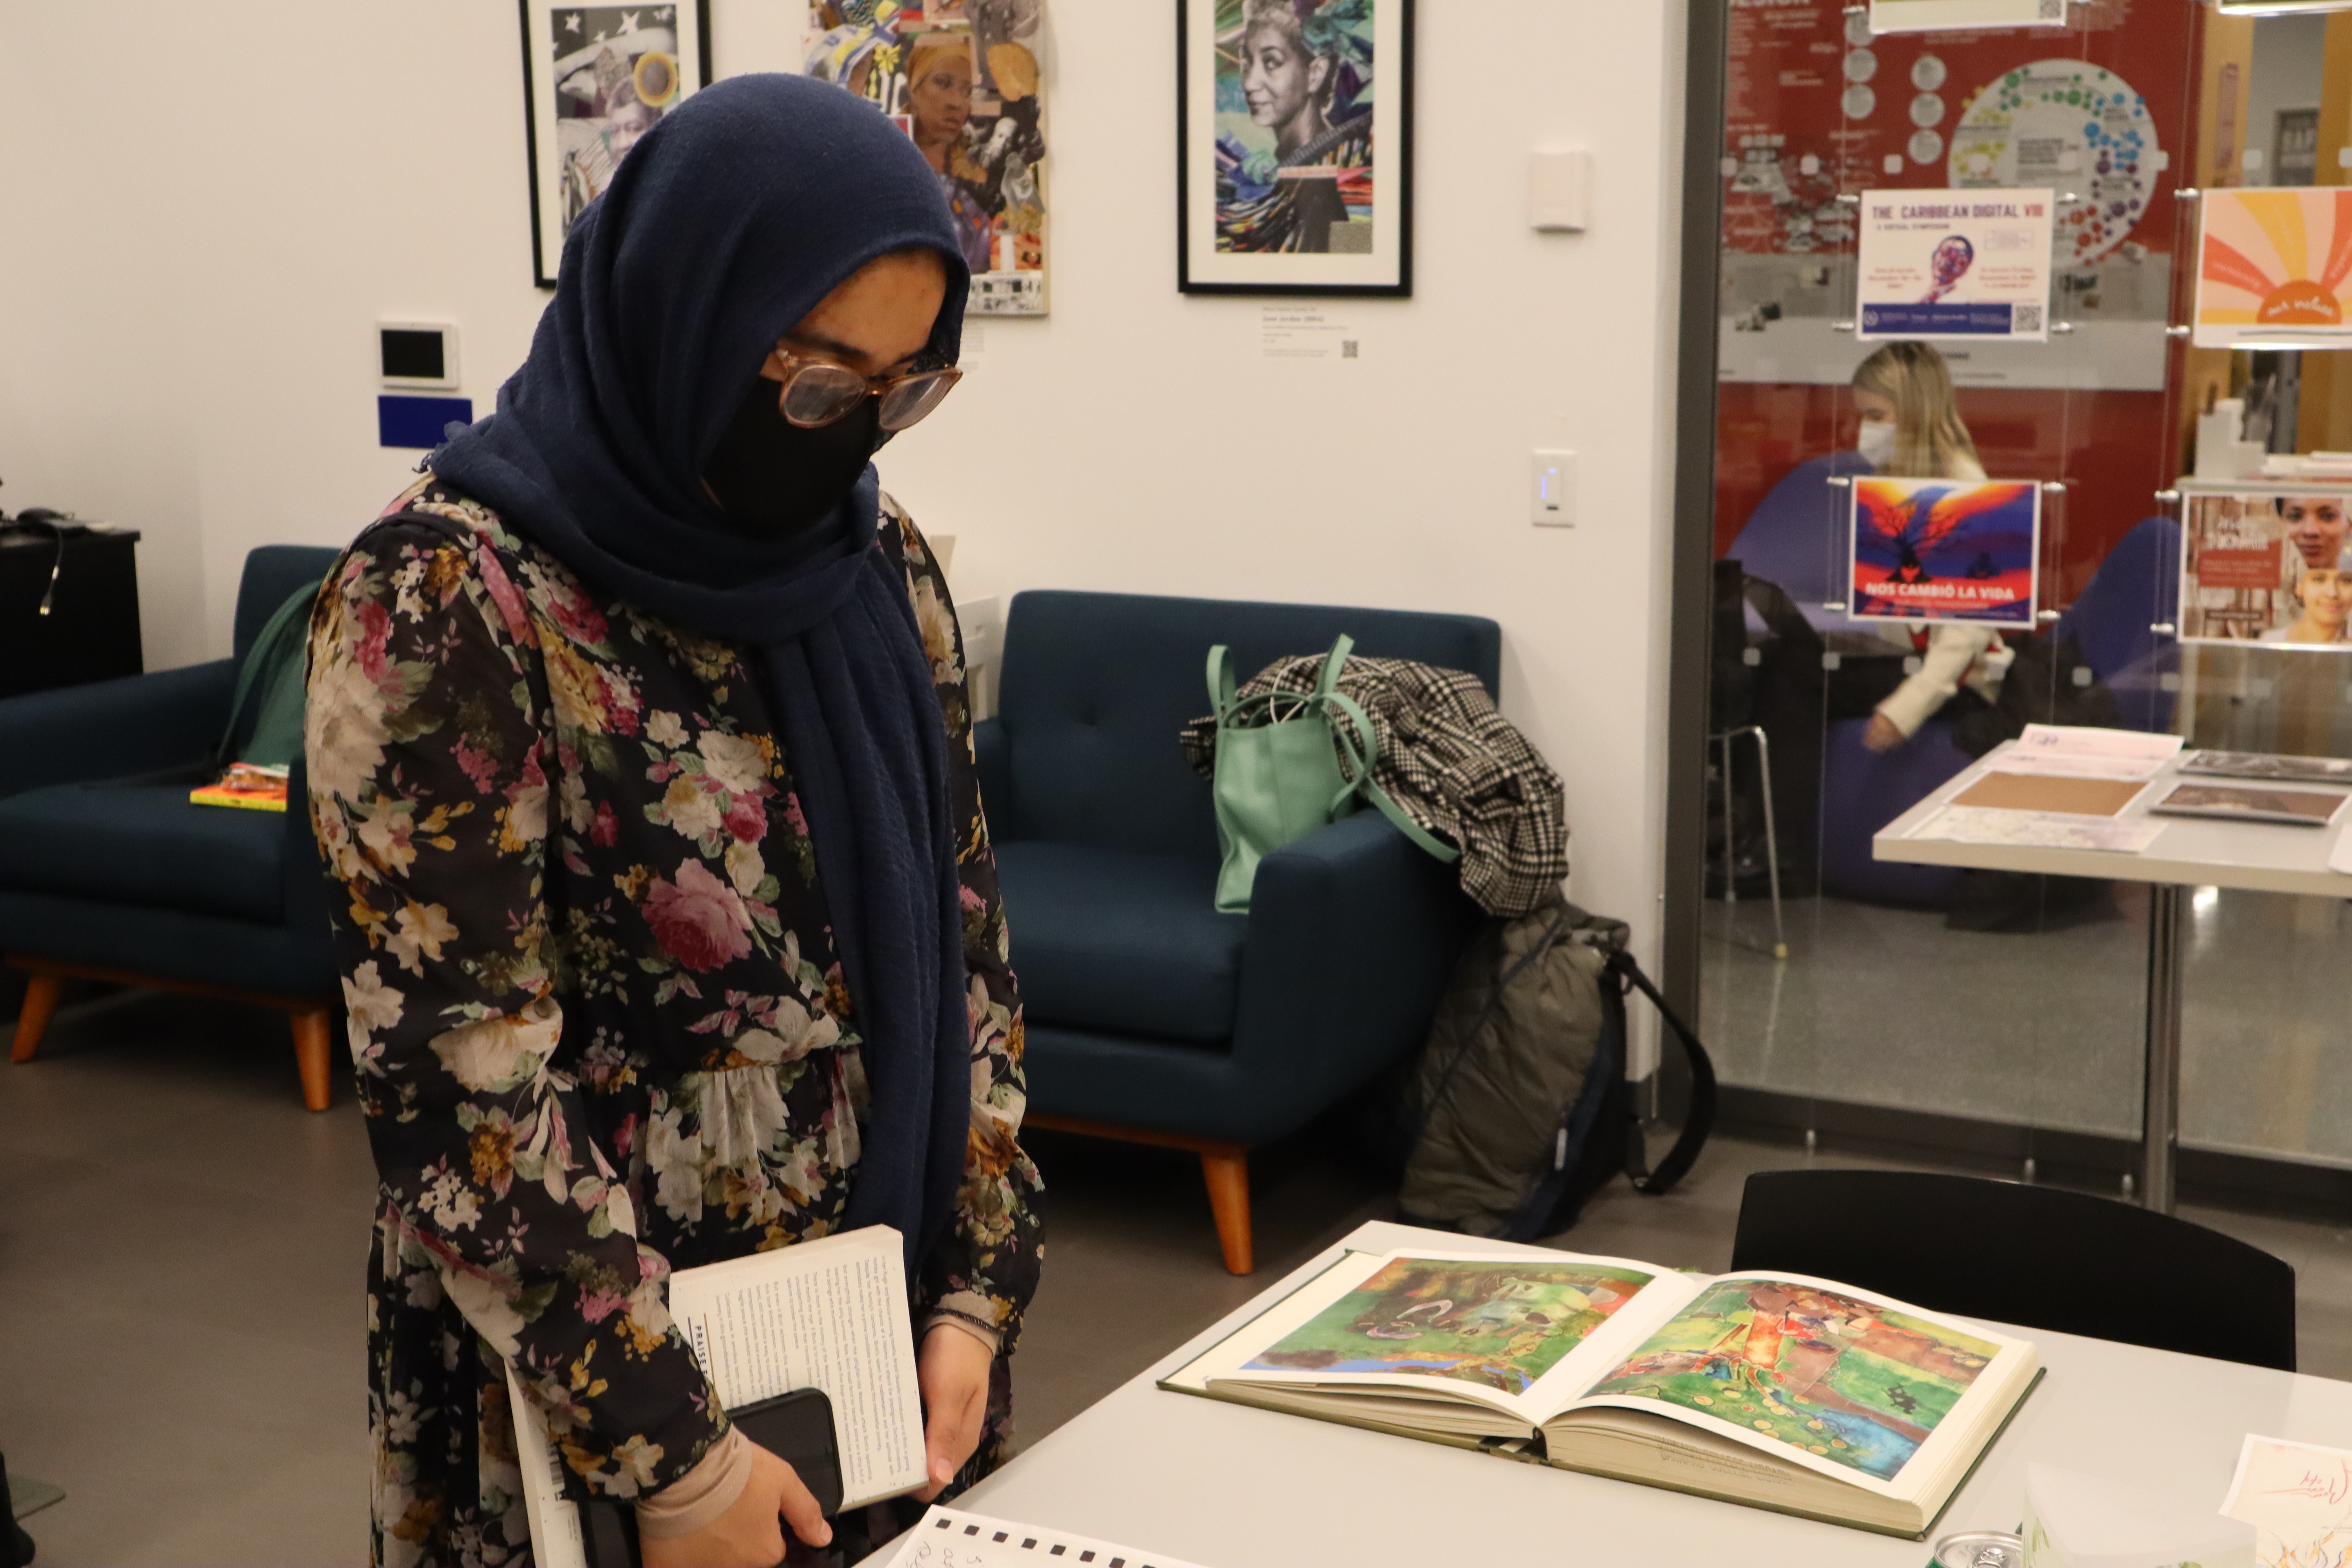 One person looks through archival materials used in the DHC's Collaborative collage